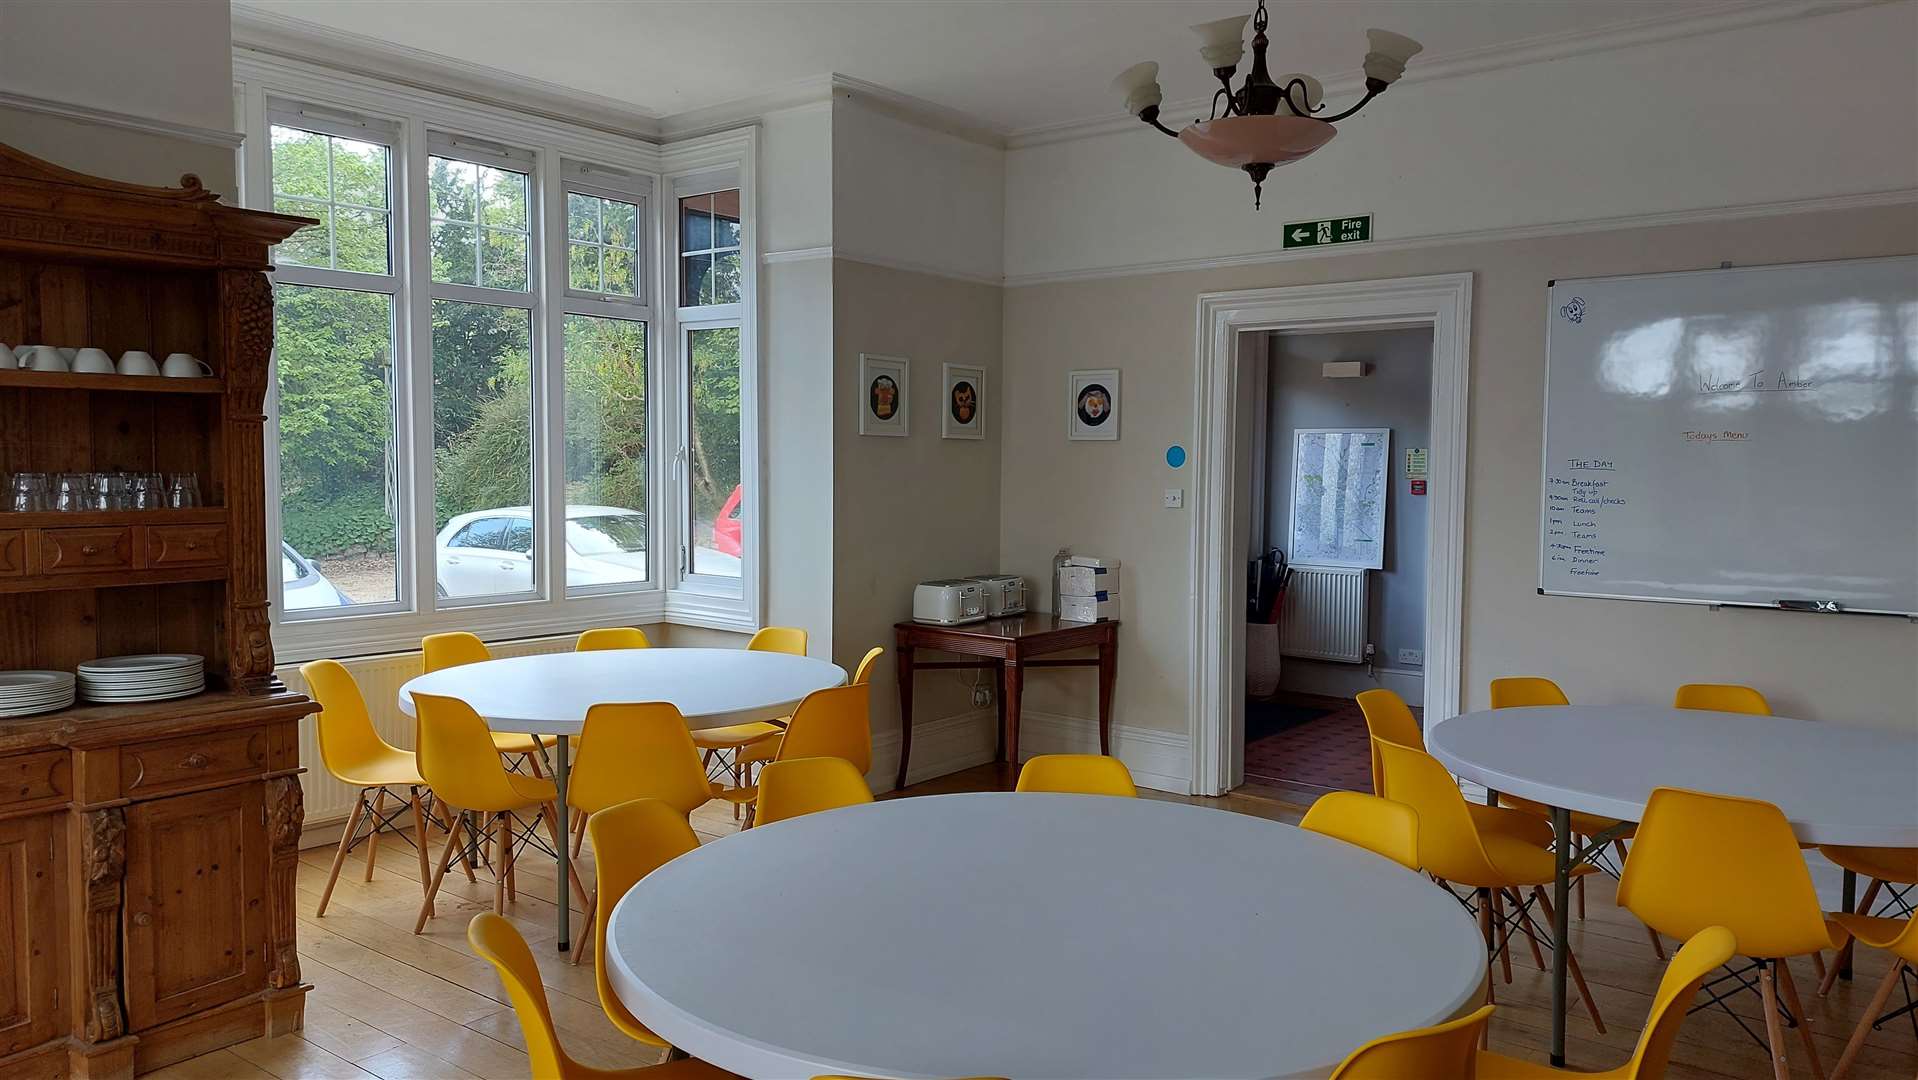 The dining area inside the former B&B